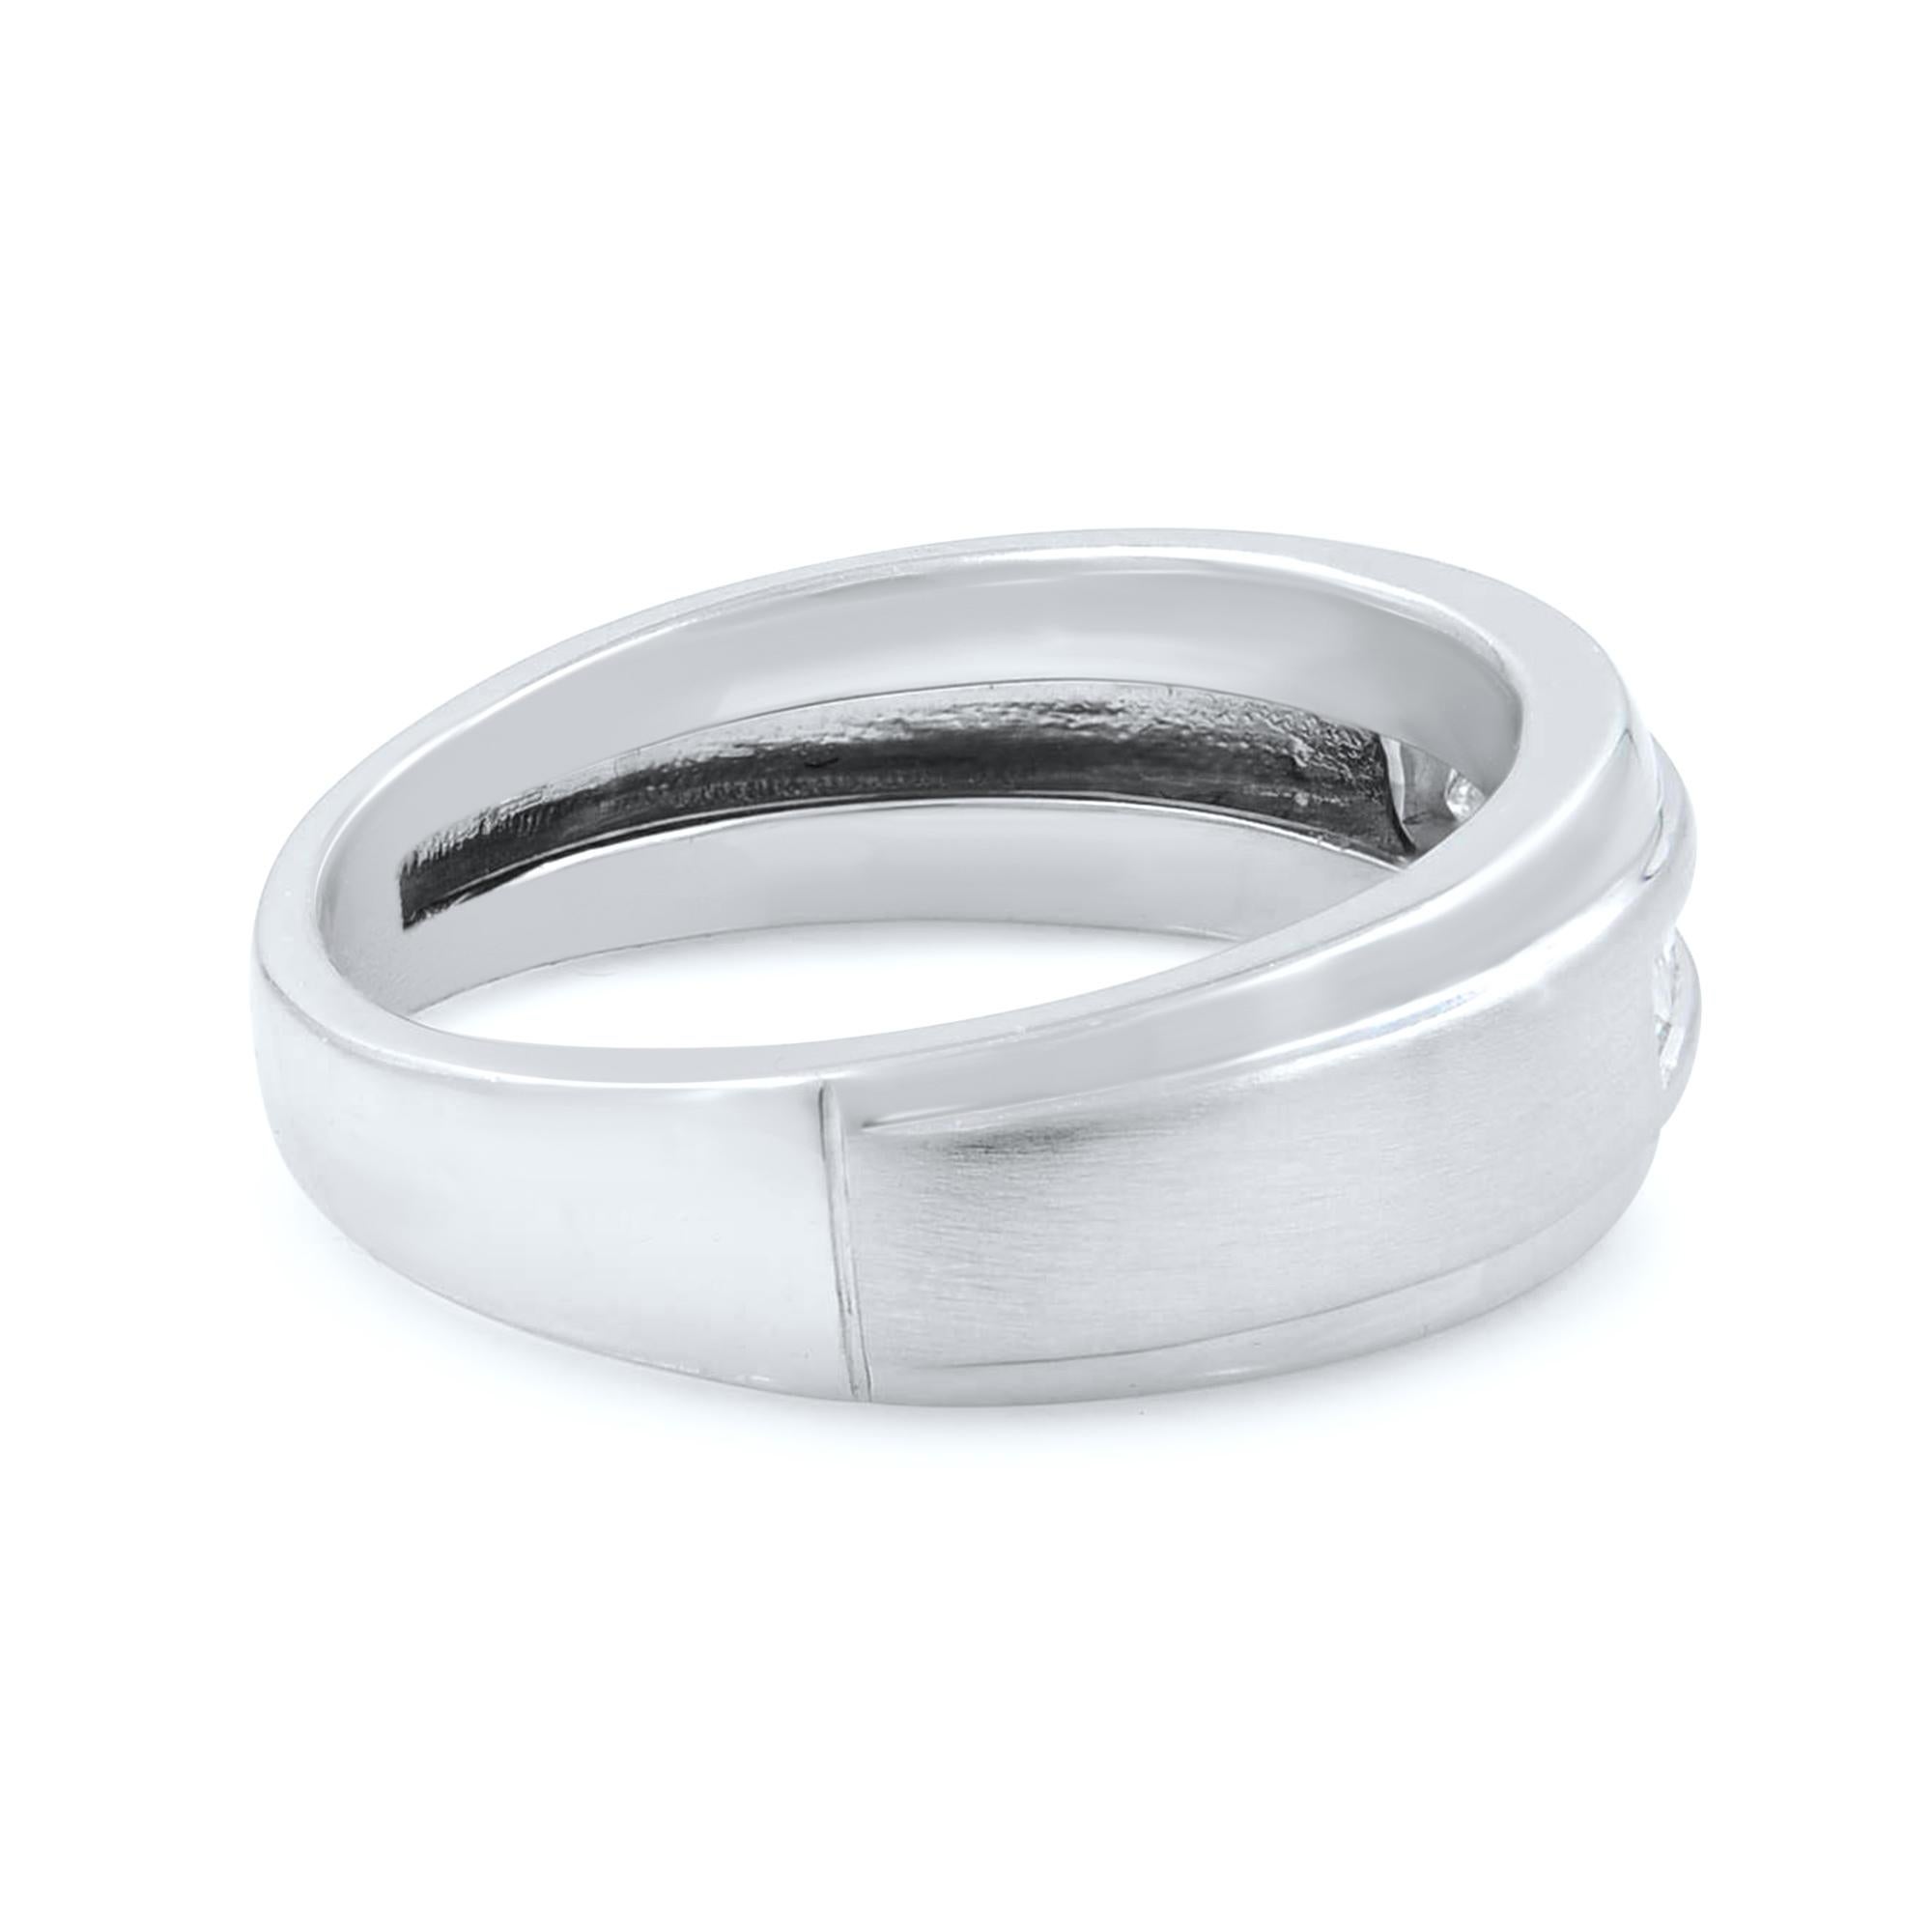 Men's diamond wedding band ring crafted in 10k white gold. The total carat weight of the ring is 0.40. The diamonds are channel set and are of H-I color and VS-SI clarity. Ring size is 10 (Can be resized). Top of the ring width: 8mm. Bottom shank